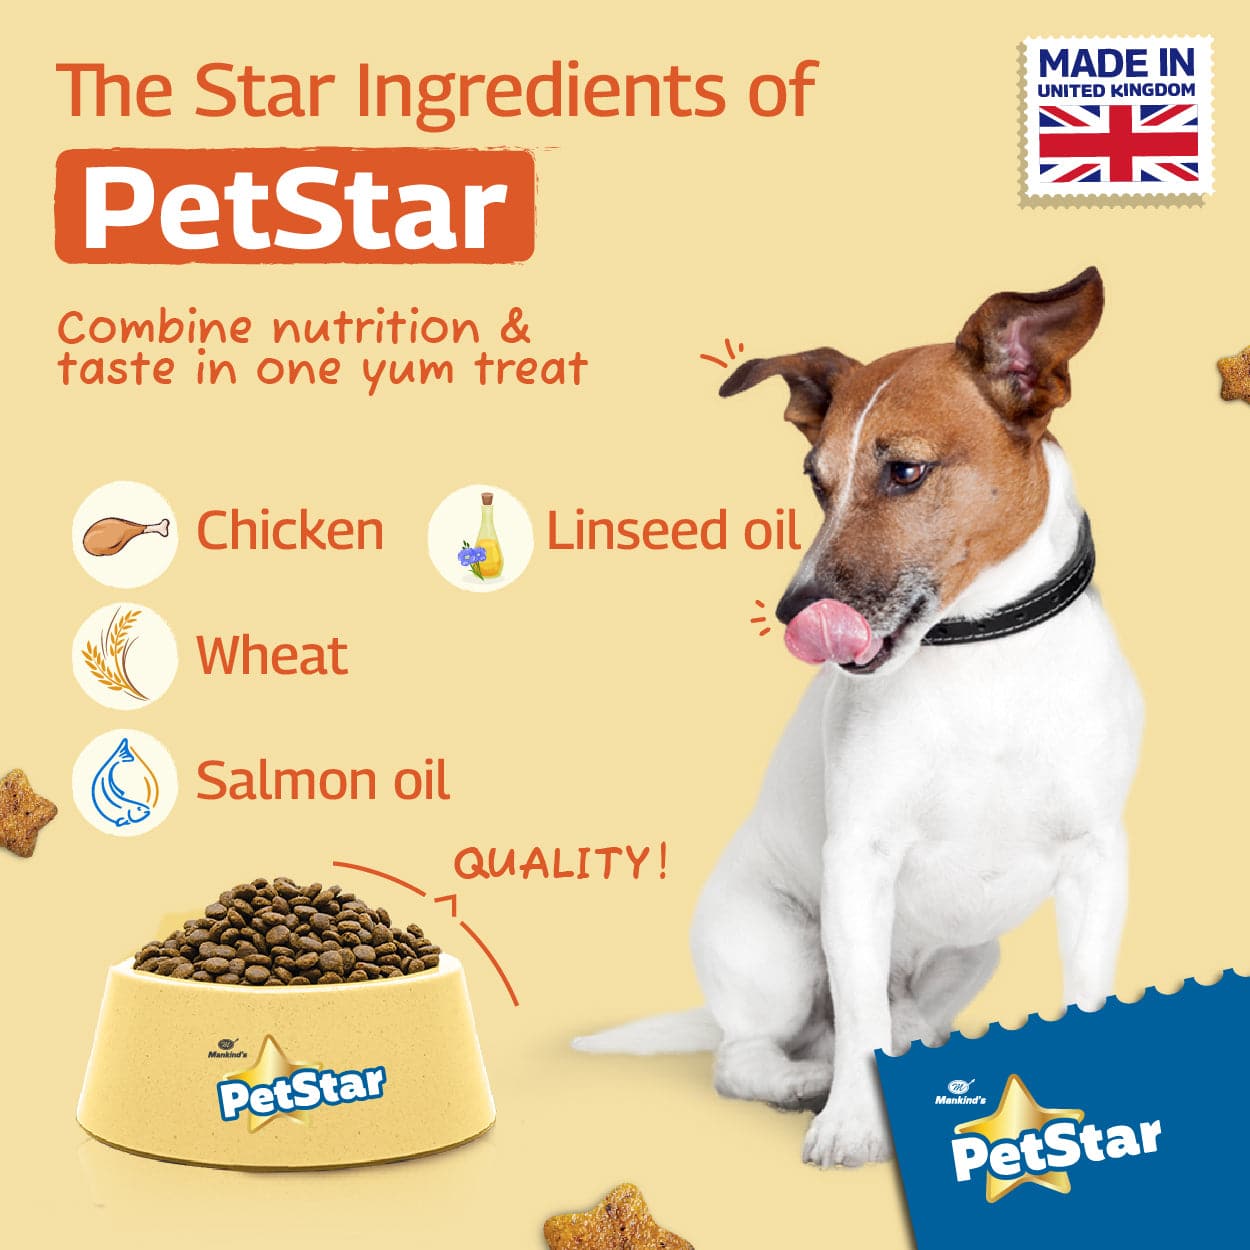 Mankind Petstar Chicken and Wheat Adult Dog Dry Food